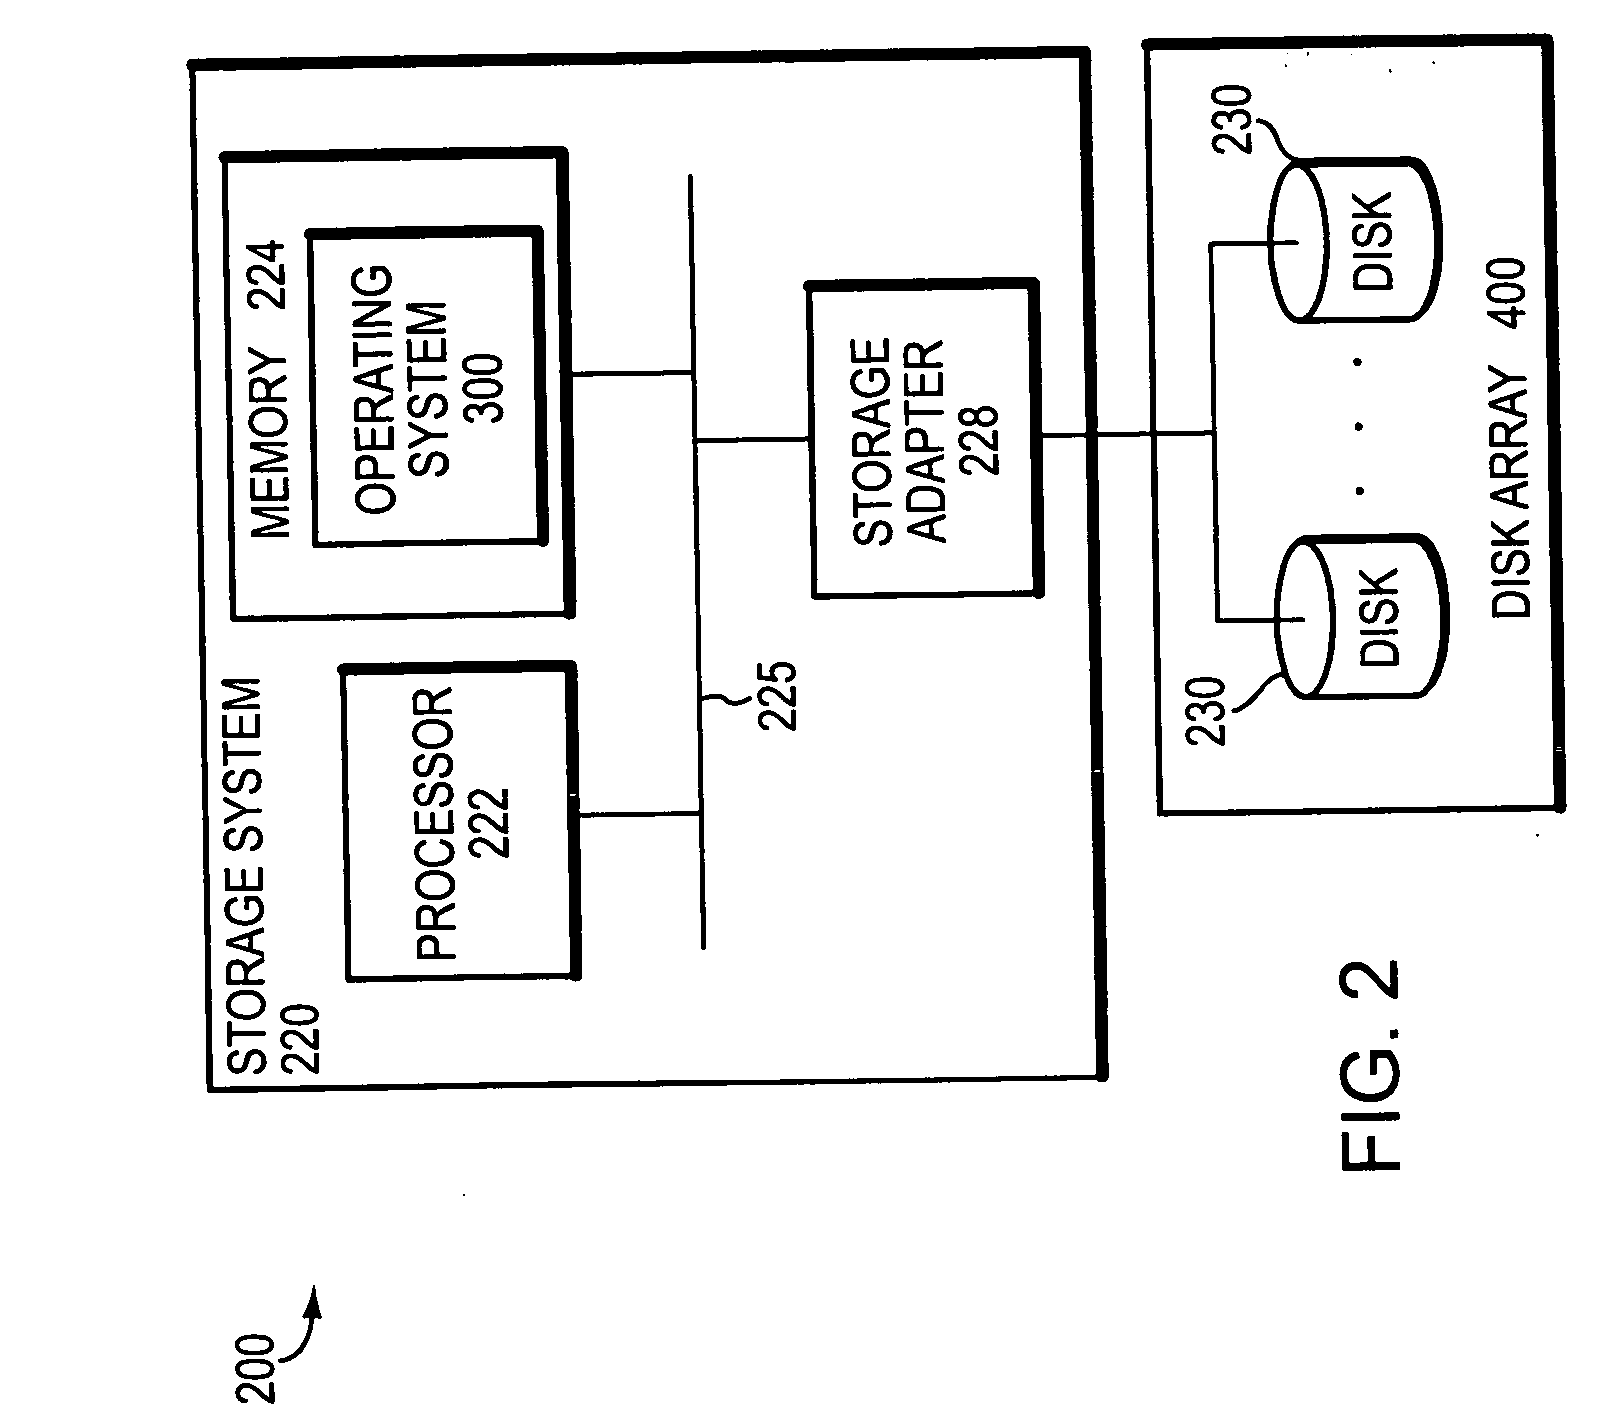 Row-diagonal parity technique for enabling efficient recovery from double failures in a storage array